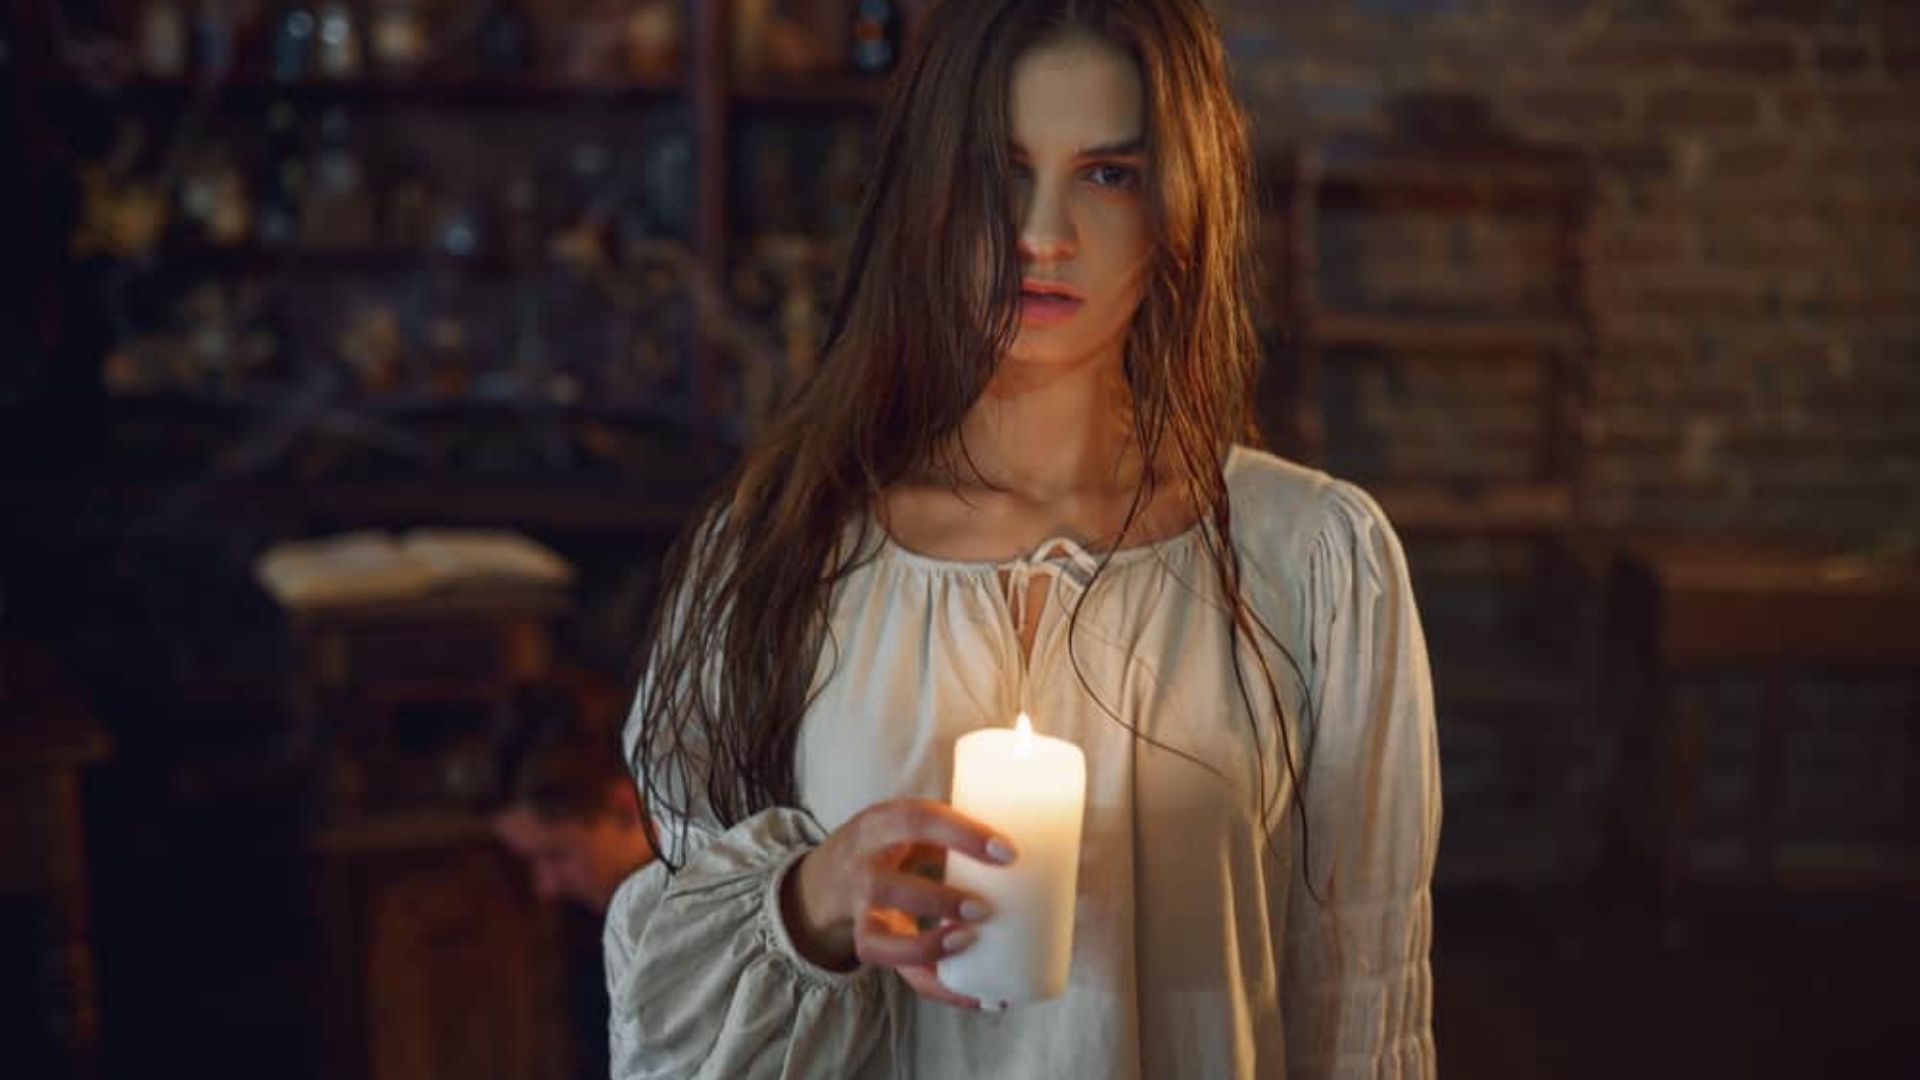 Girl With A Candle In Hand